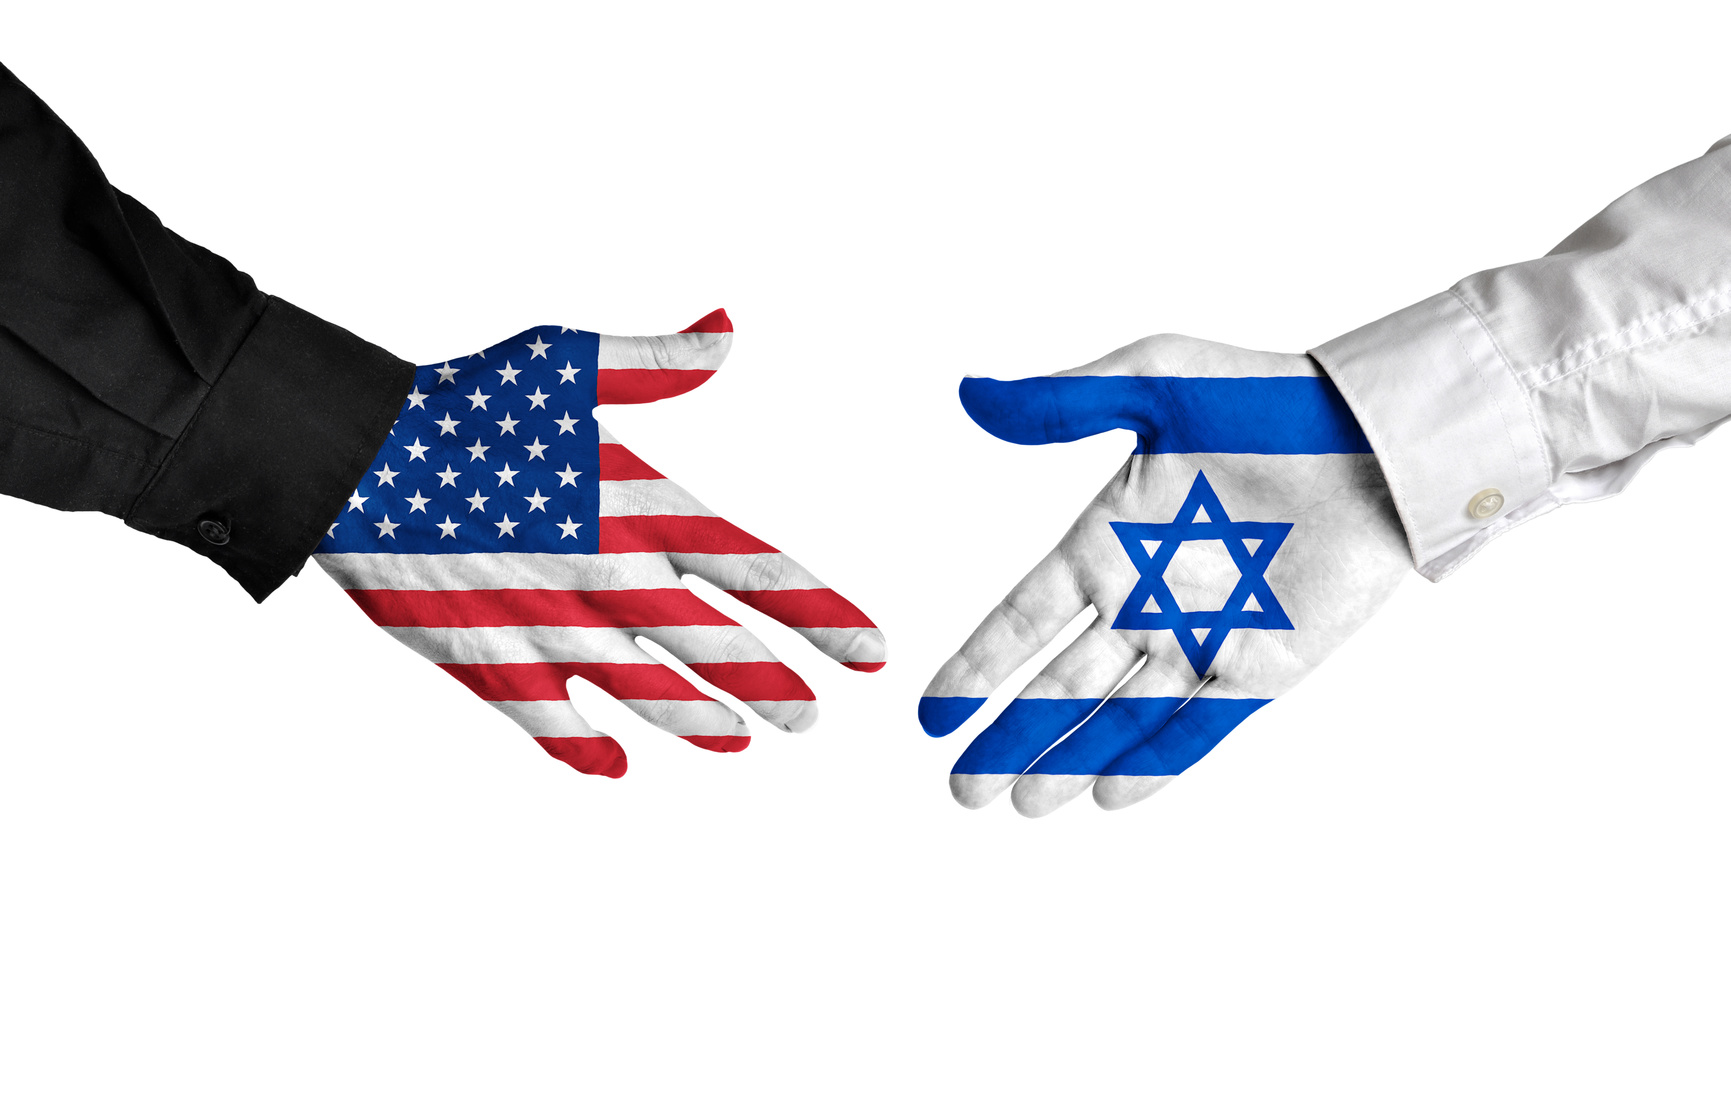 United States and Israel leaders shaking hands on a deal agreement